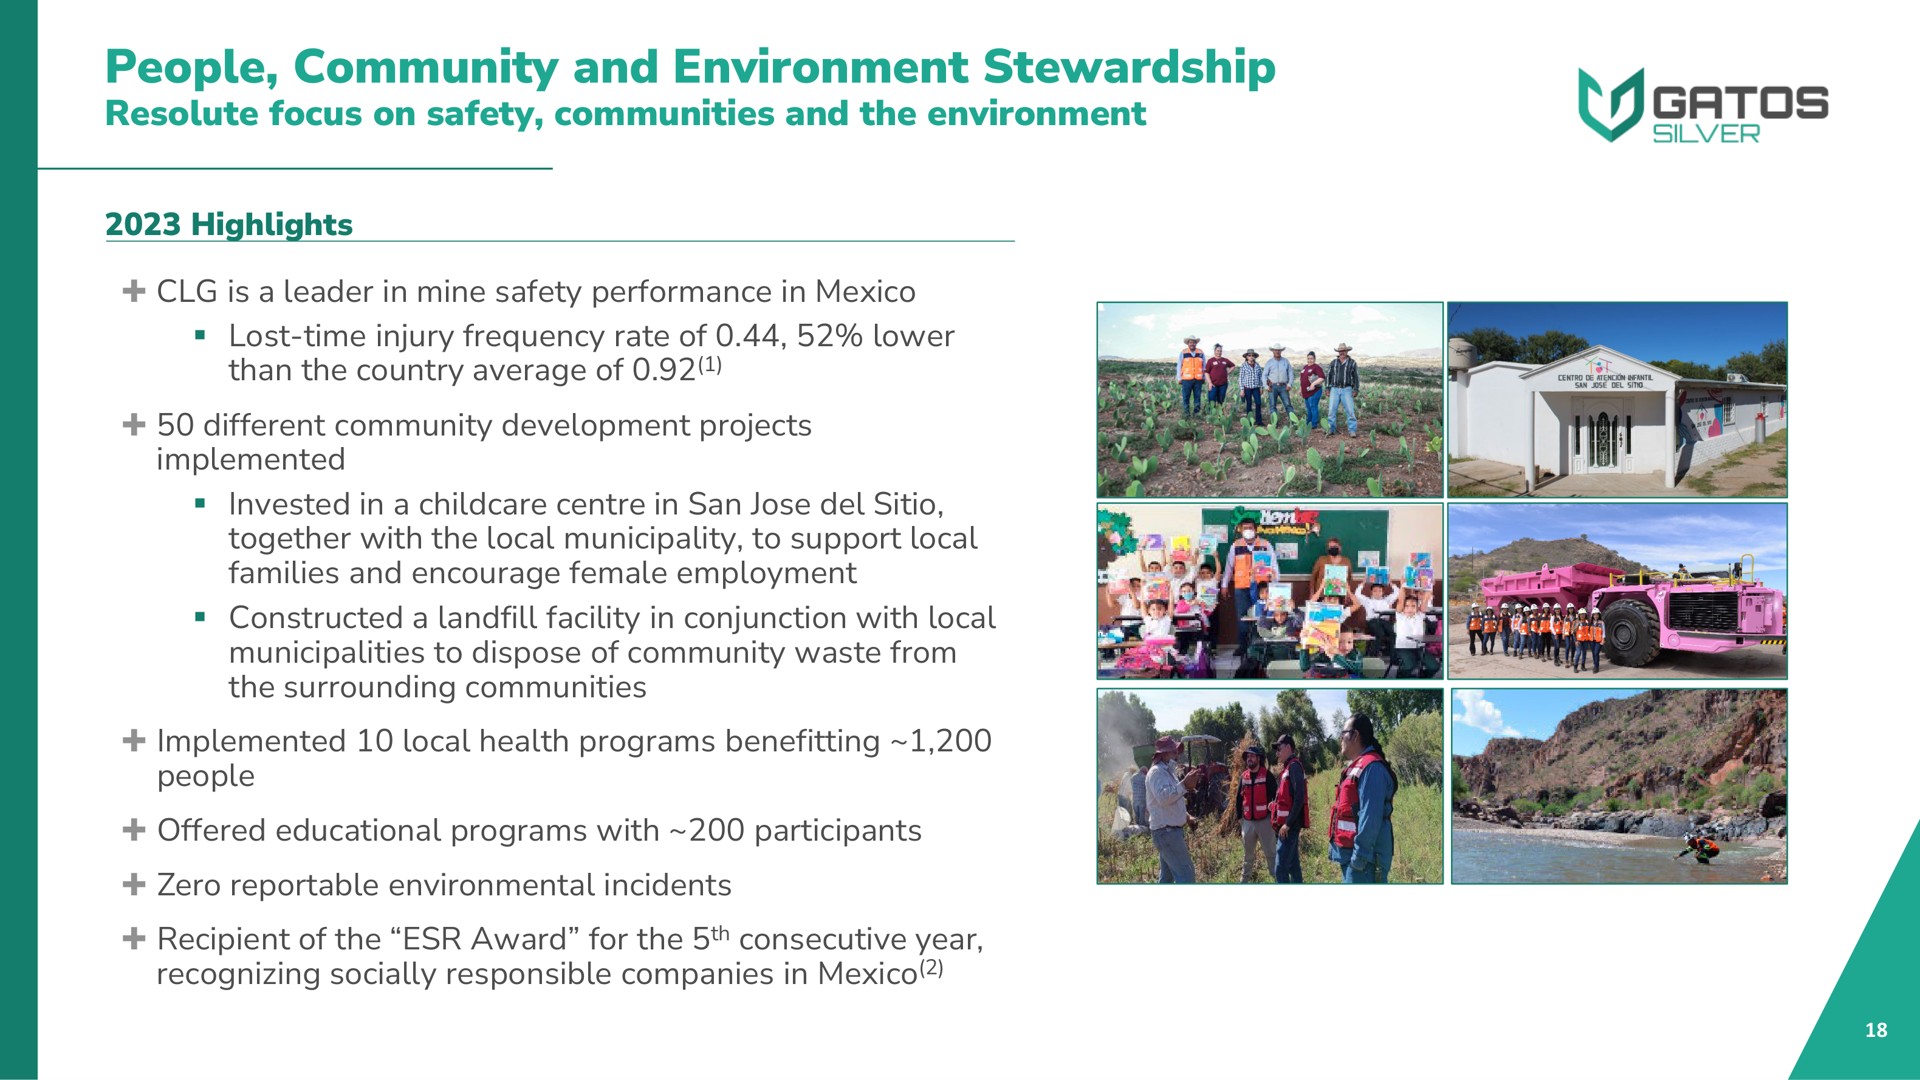 people community and environment stewardship resolute focus on safety communities and the environment highlights | Gatos Silver